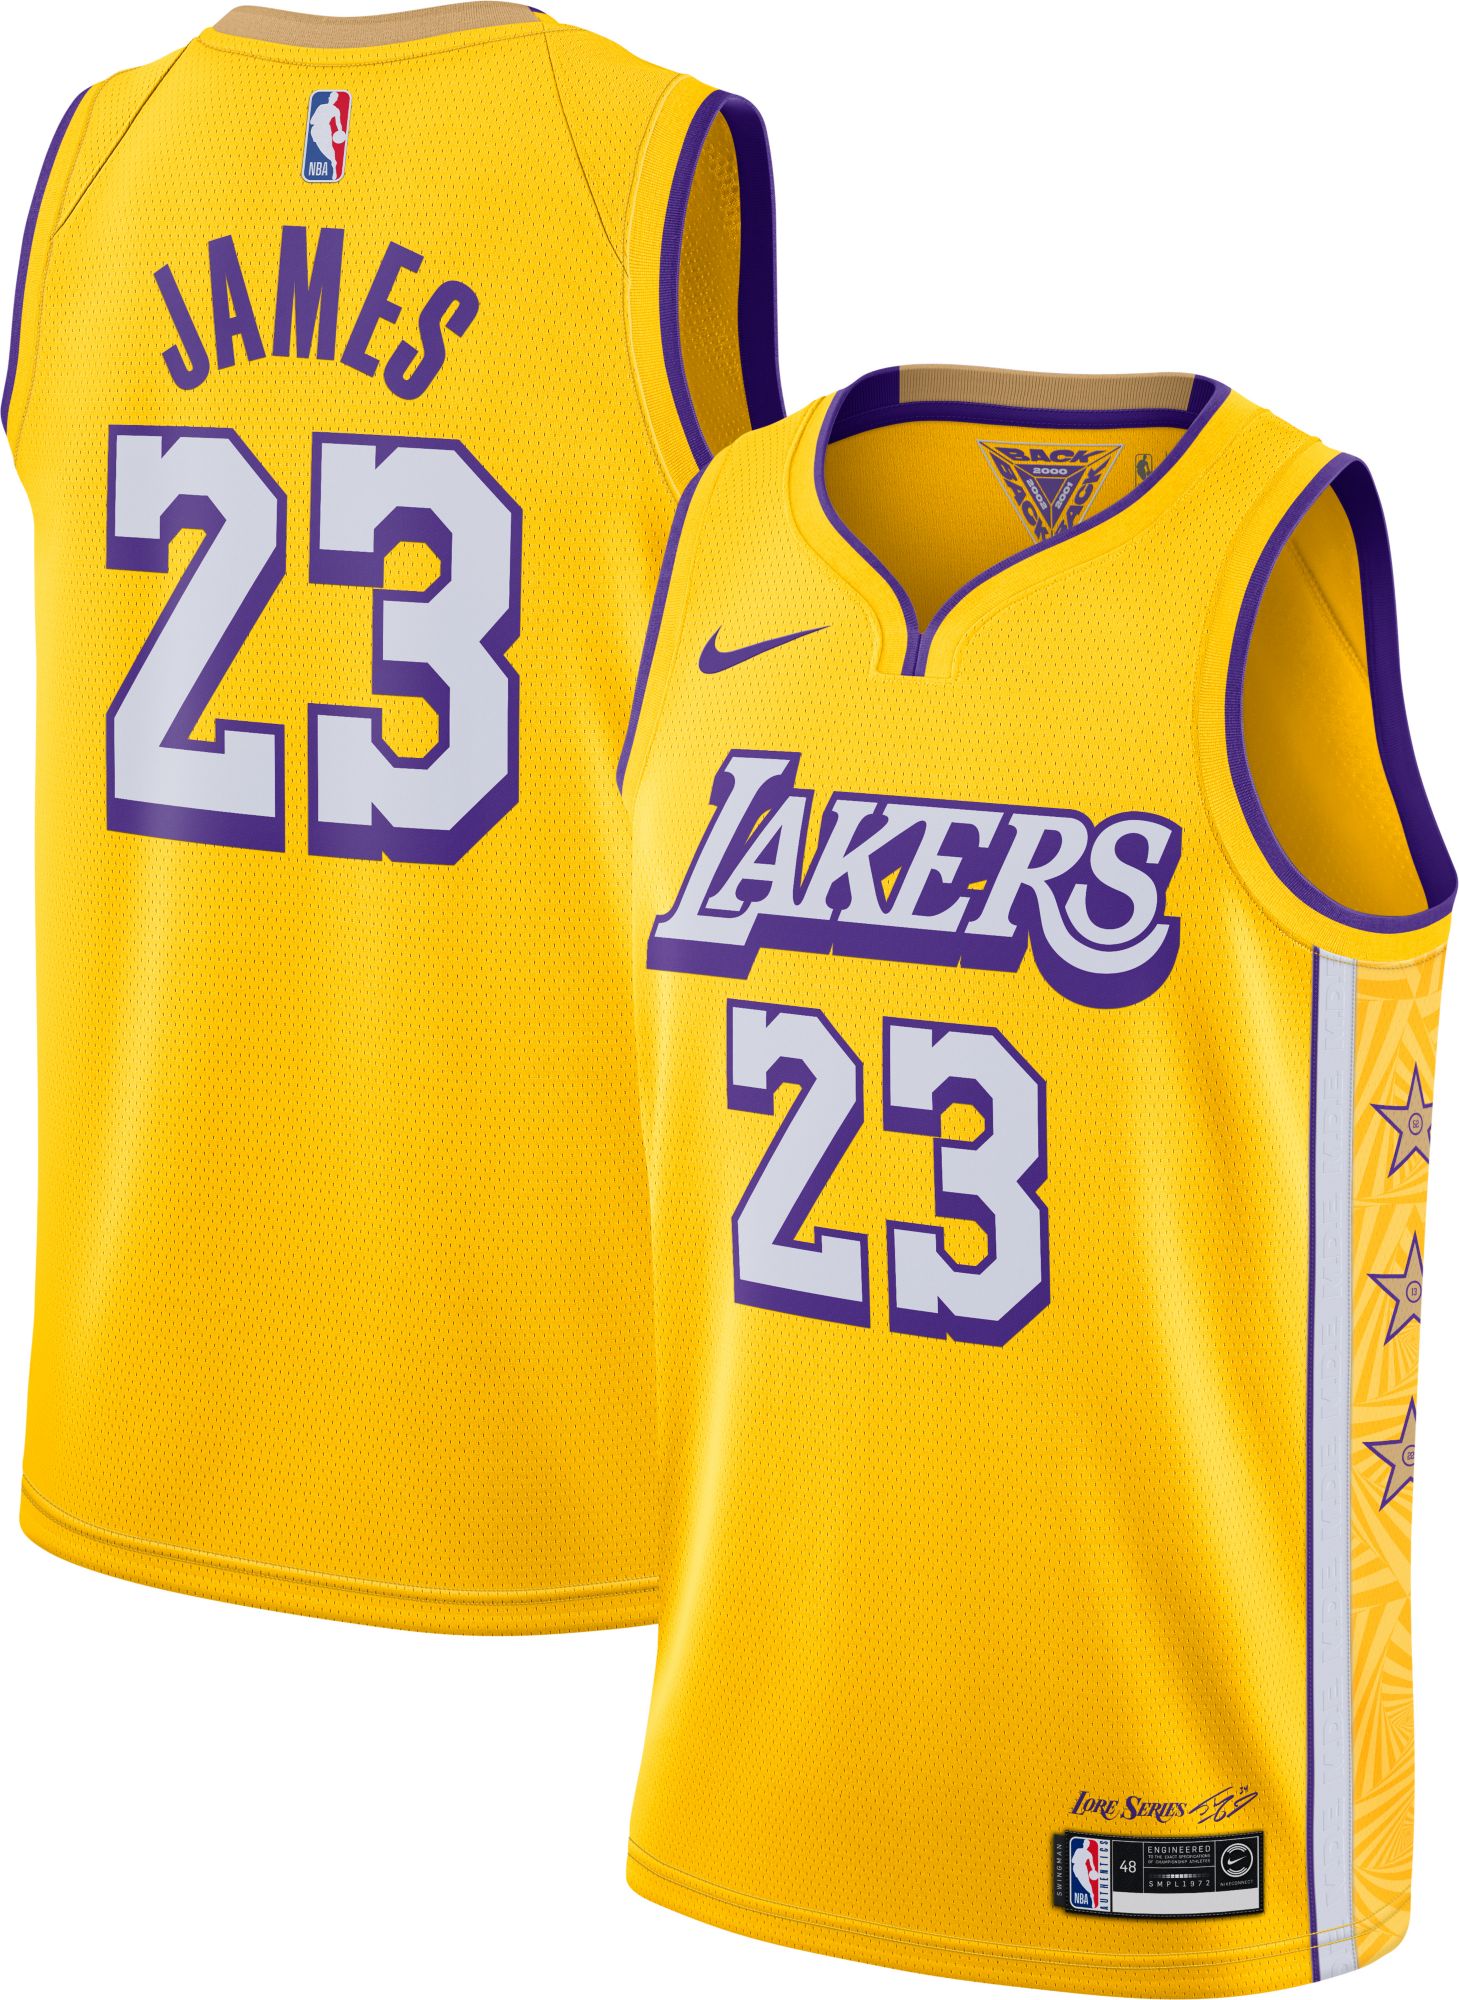 lebron james signed lakers jersey